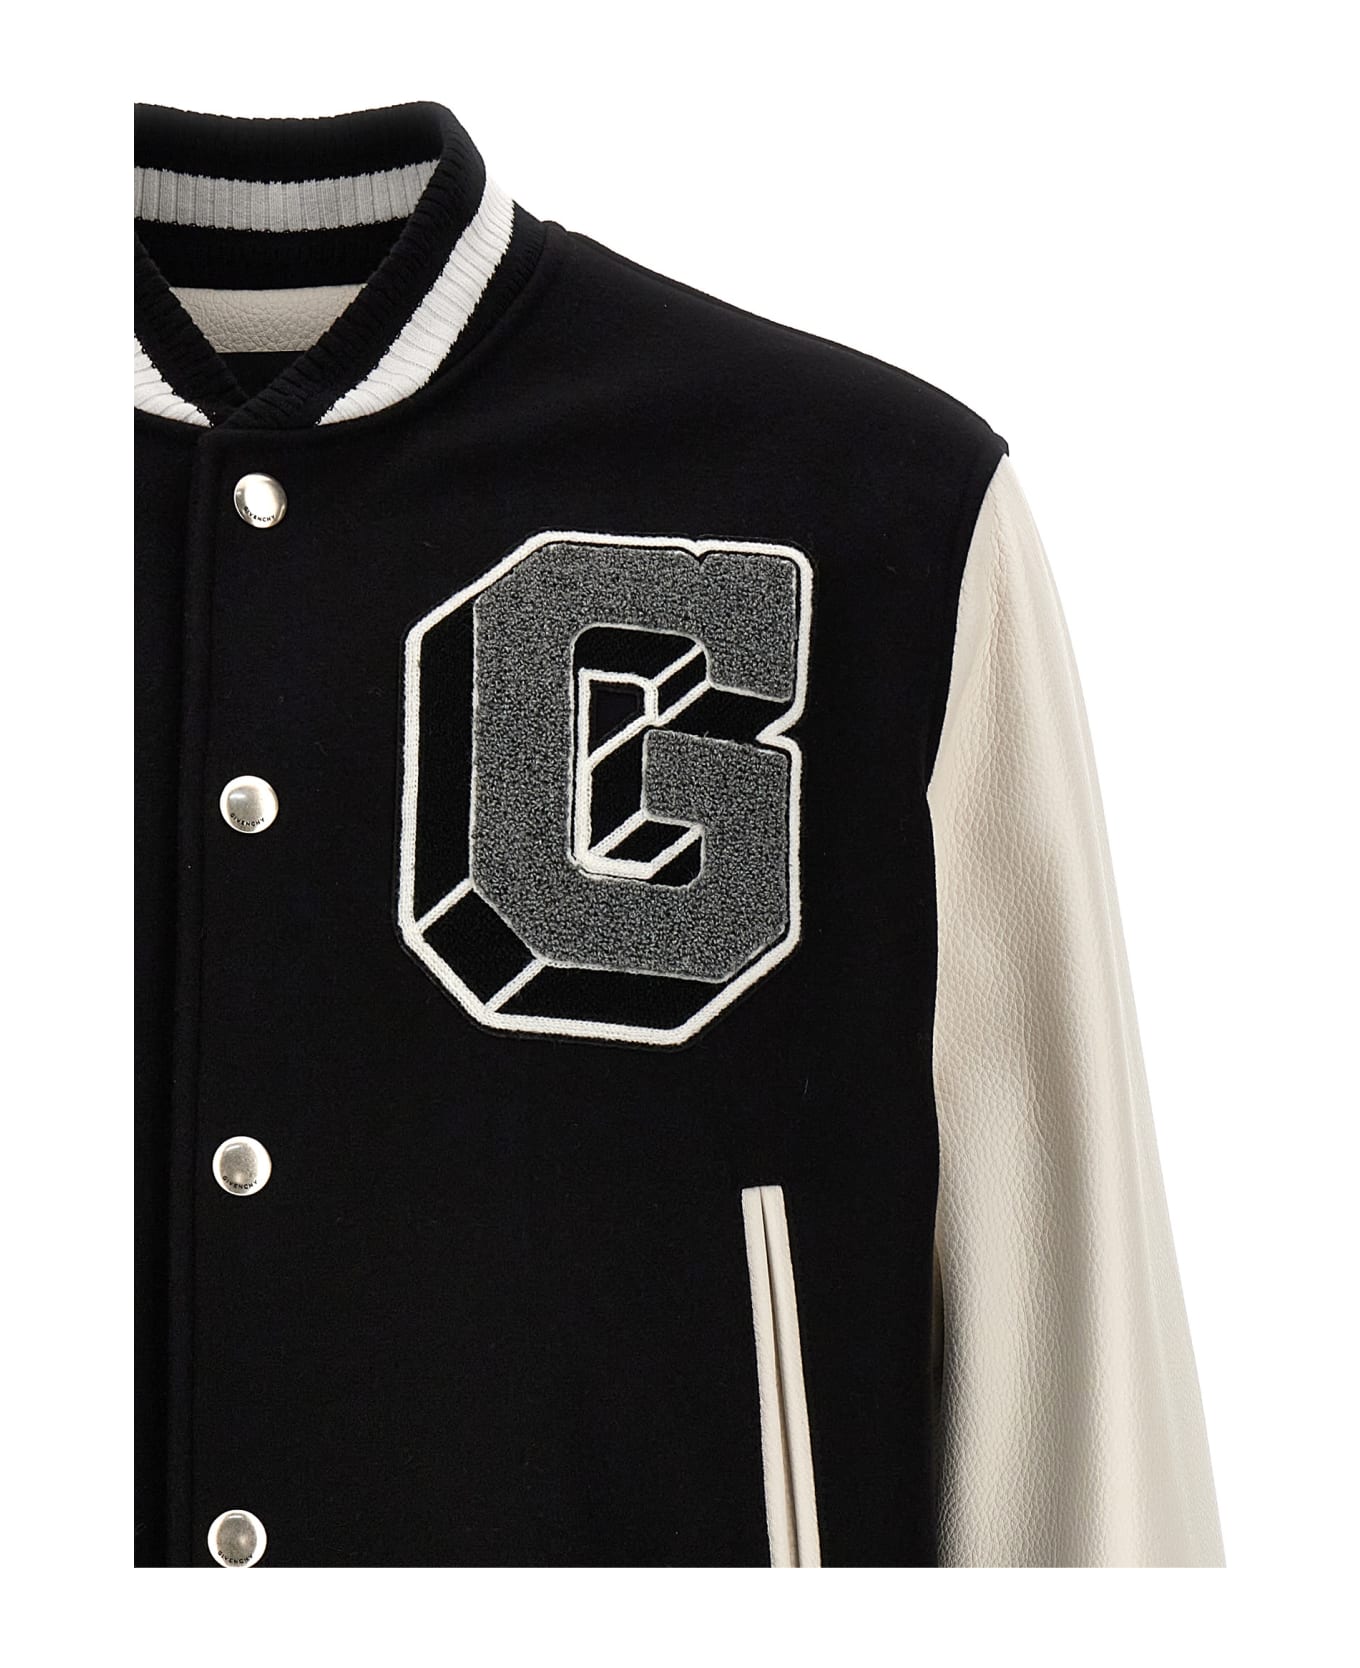 Givenchy Patches And Embroidery Bomber Jacket - White/Black ジャケット